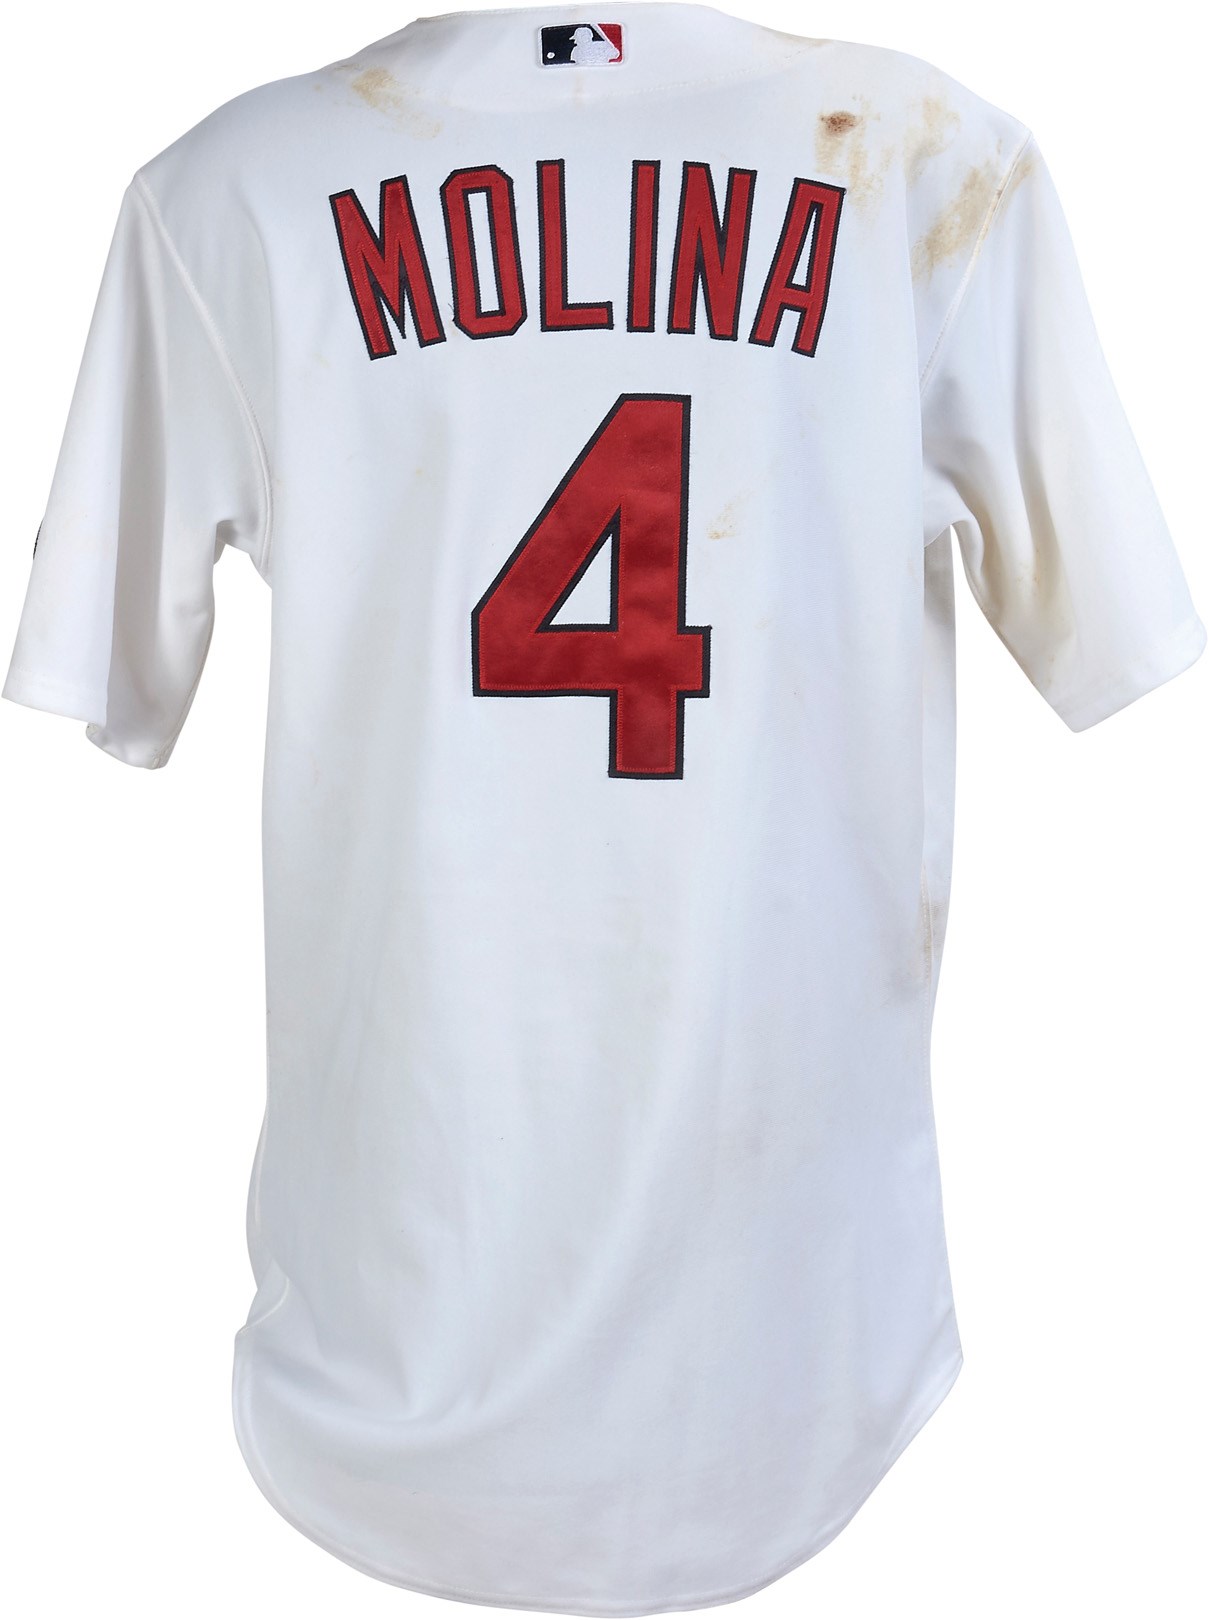 St. Louis Cardinals - 2015 Yadier Molina Game Worn 99th Career Home Run Jersey (MLB Auth. & Photo-Matched)